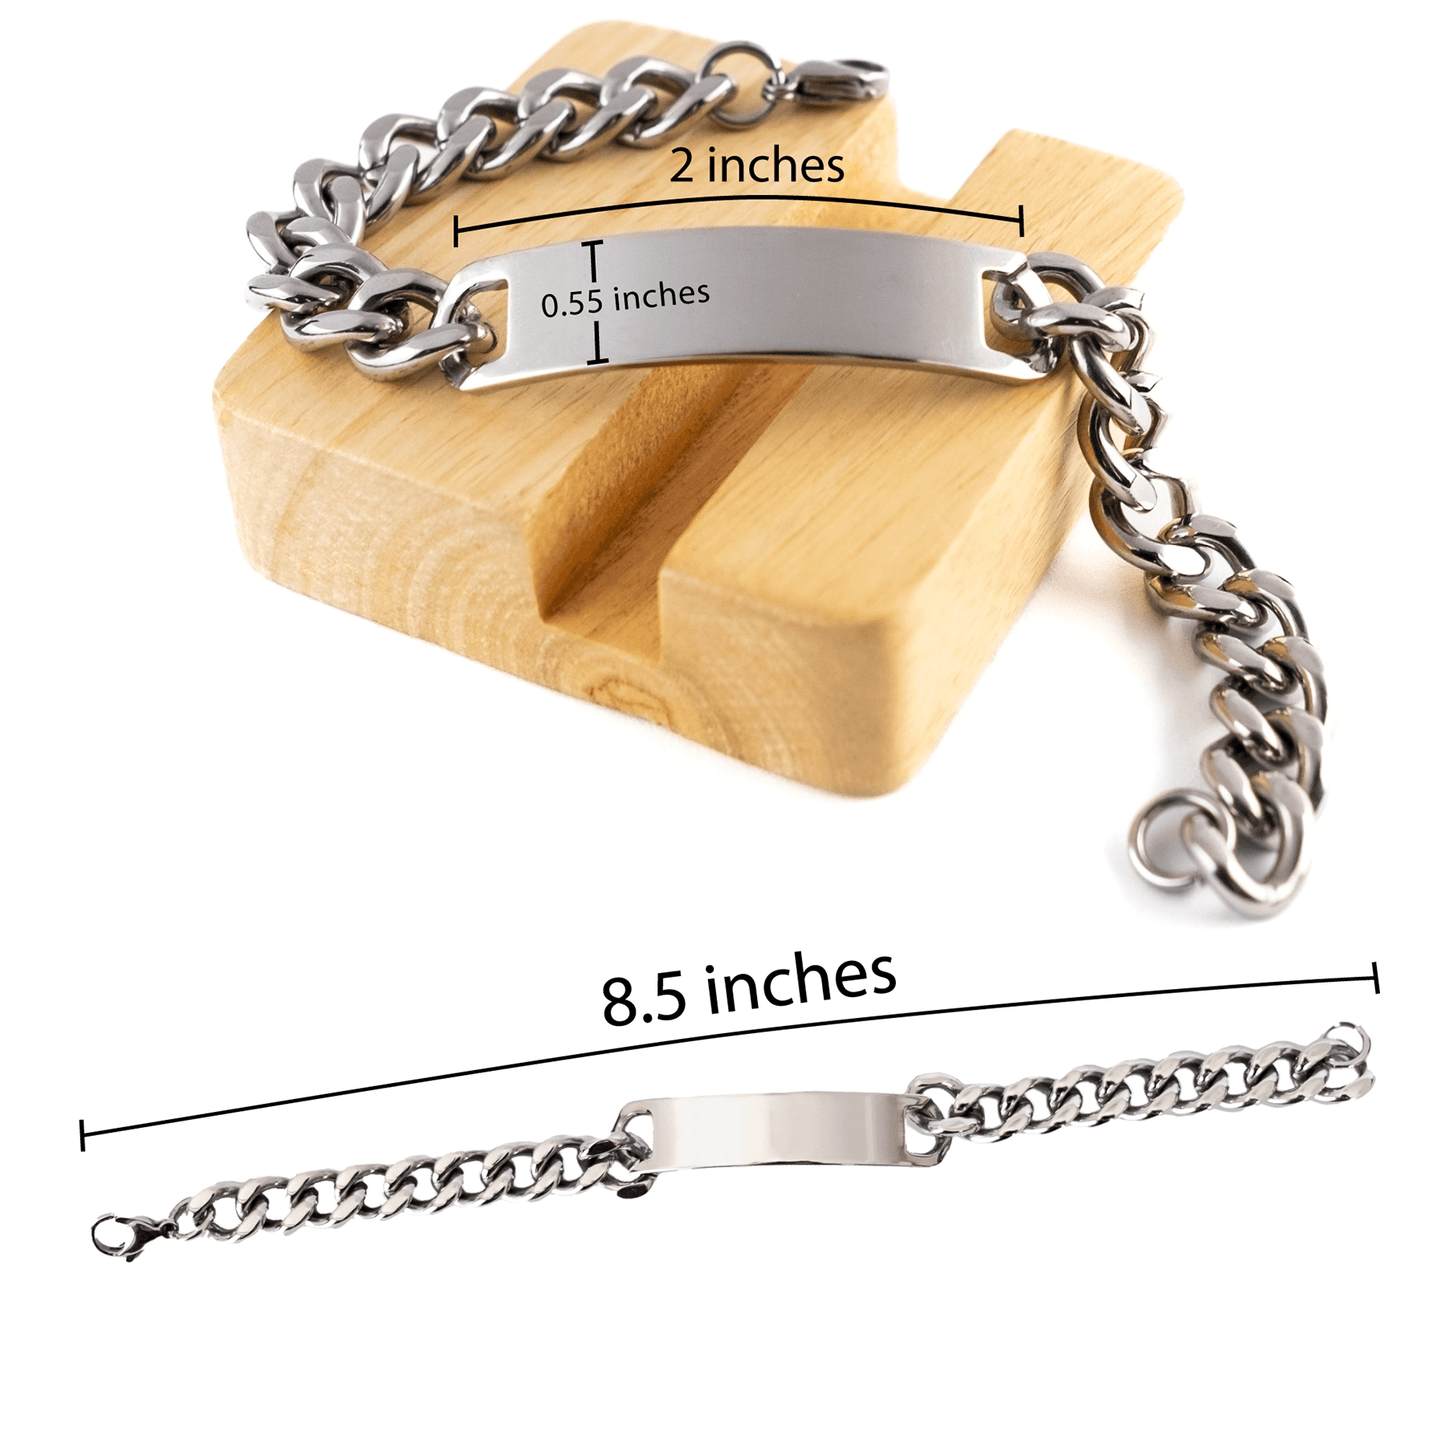 To My Nephew Gifts, Never give up no matter what, Inspirational Nephew Cuban Chain Stainless Steel Bracelet, Encouragement Birthday Christmas Unique Gifts For Nephew - Mallard Moon Gift Shop